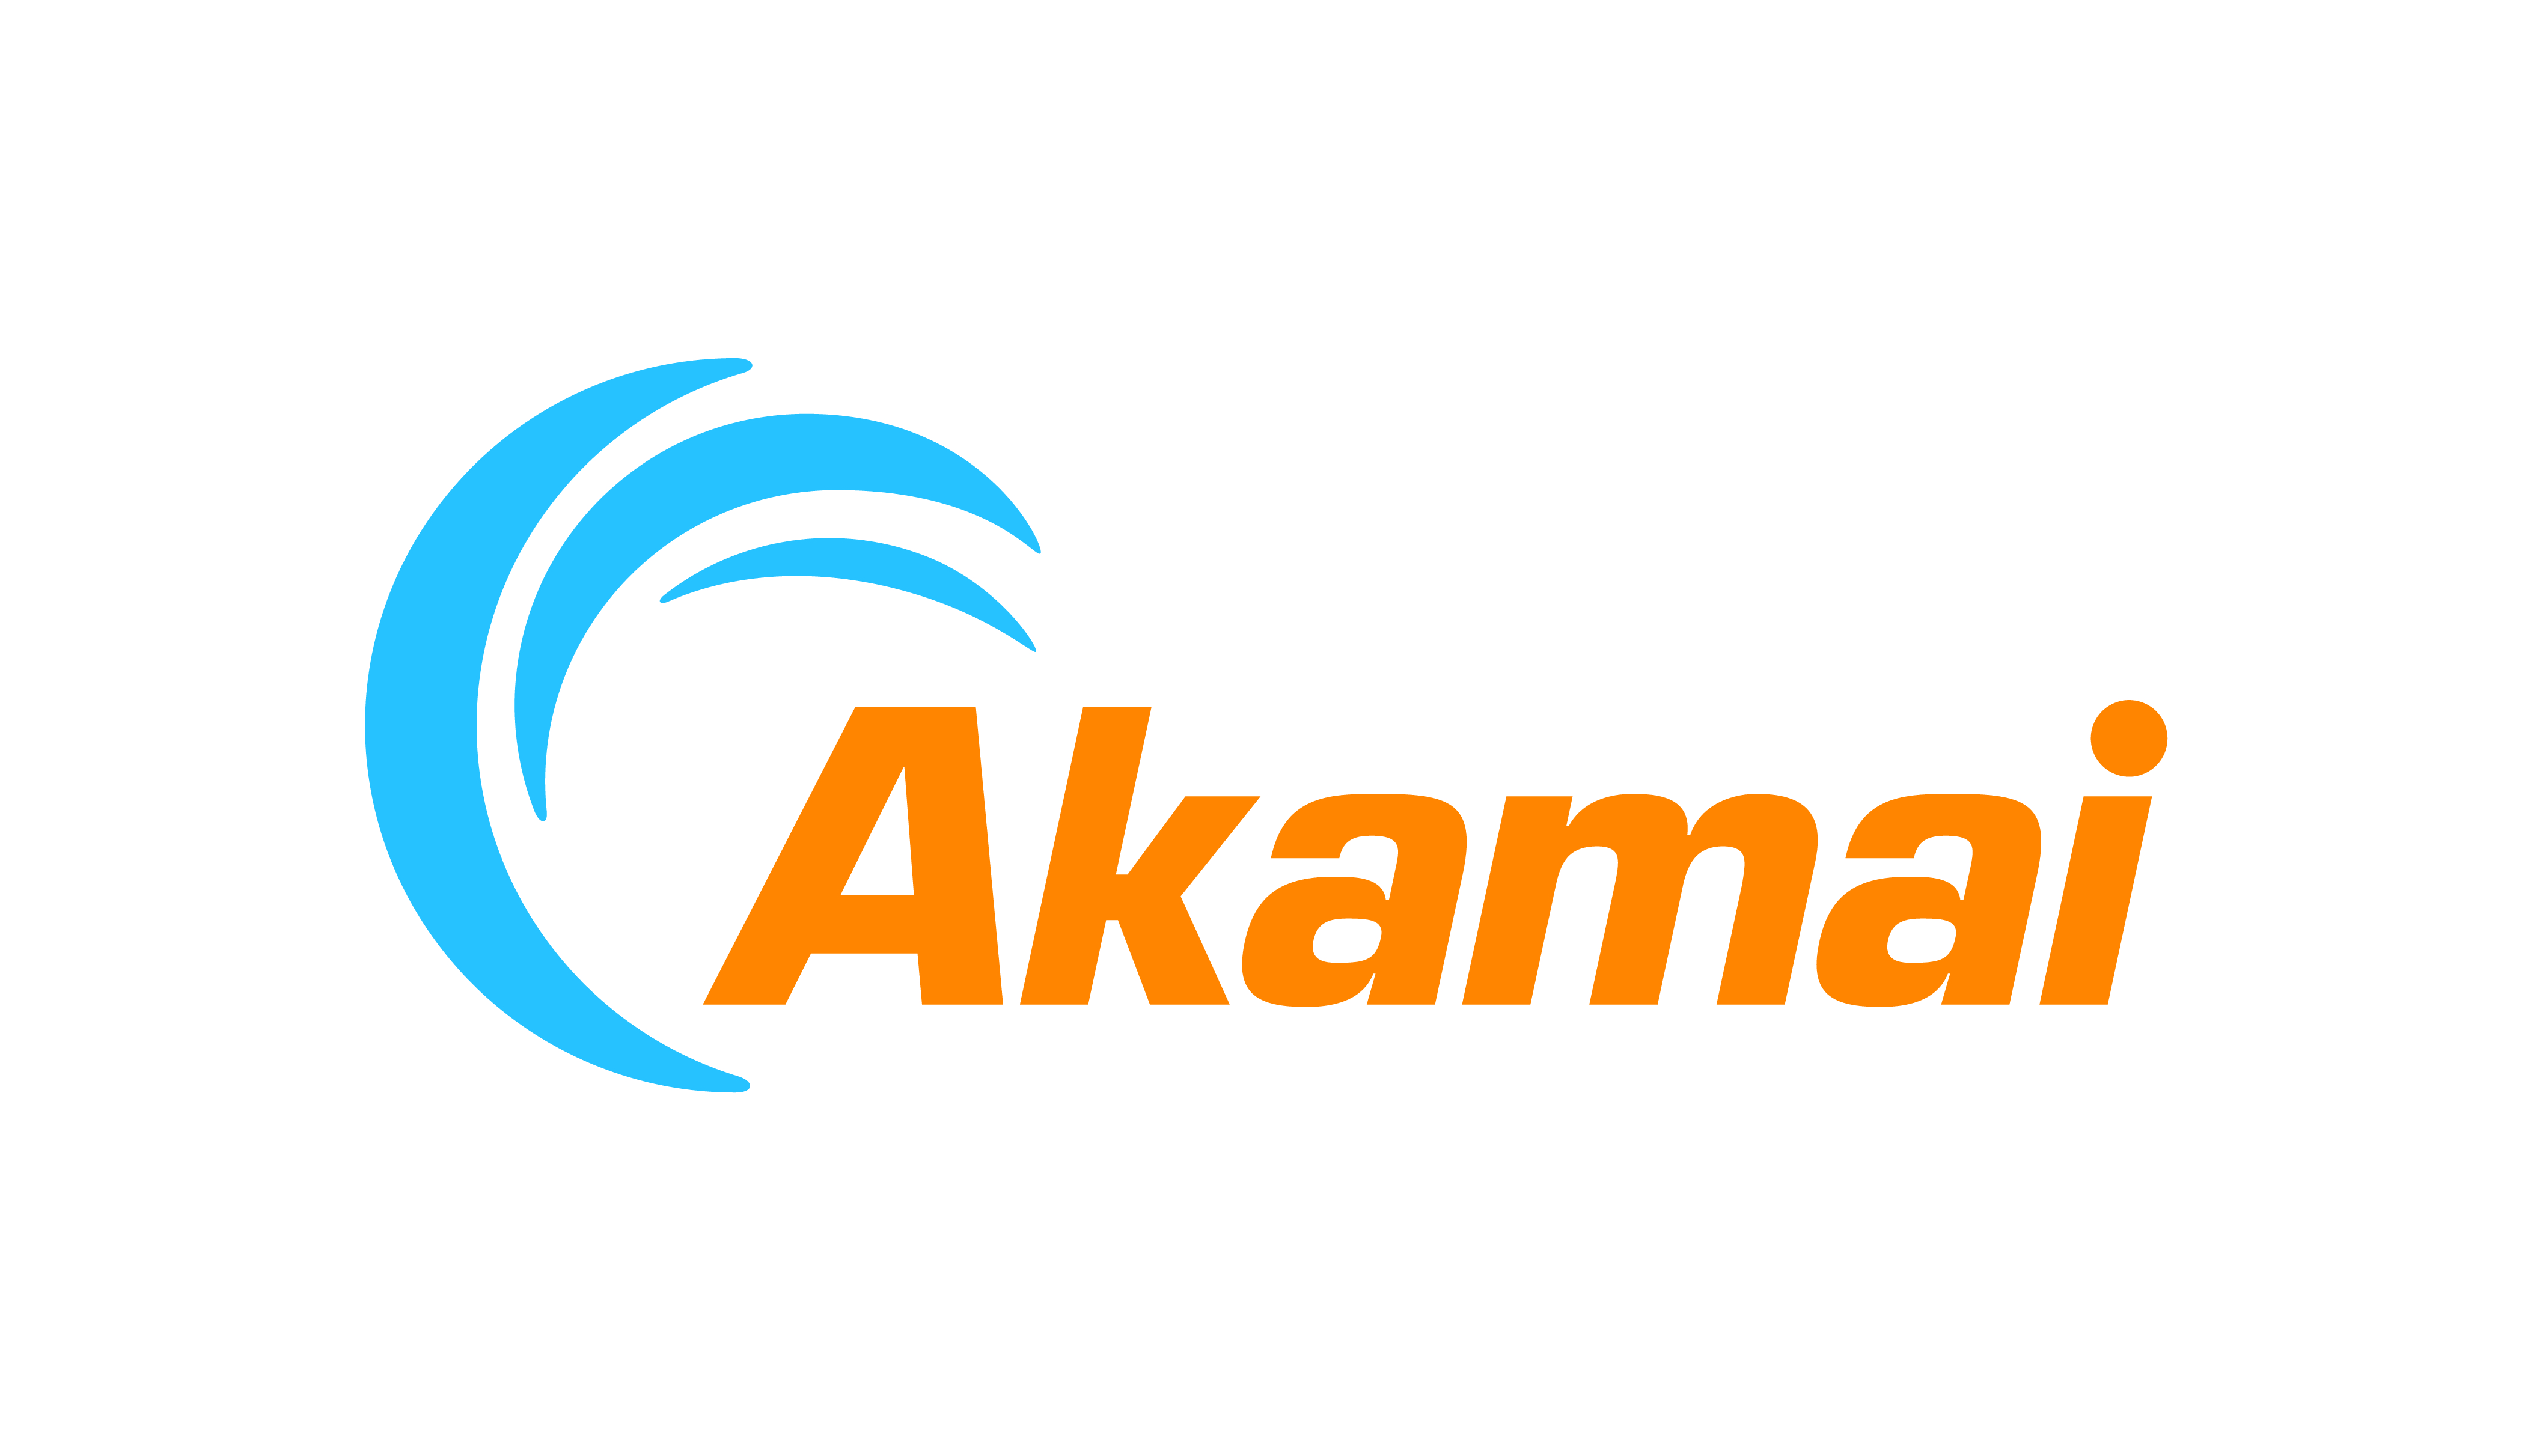 Akamai launches new products to power and protect life online